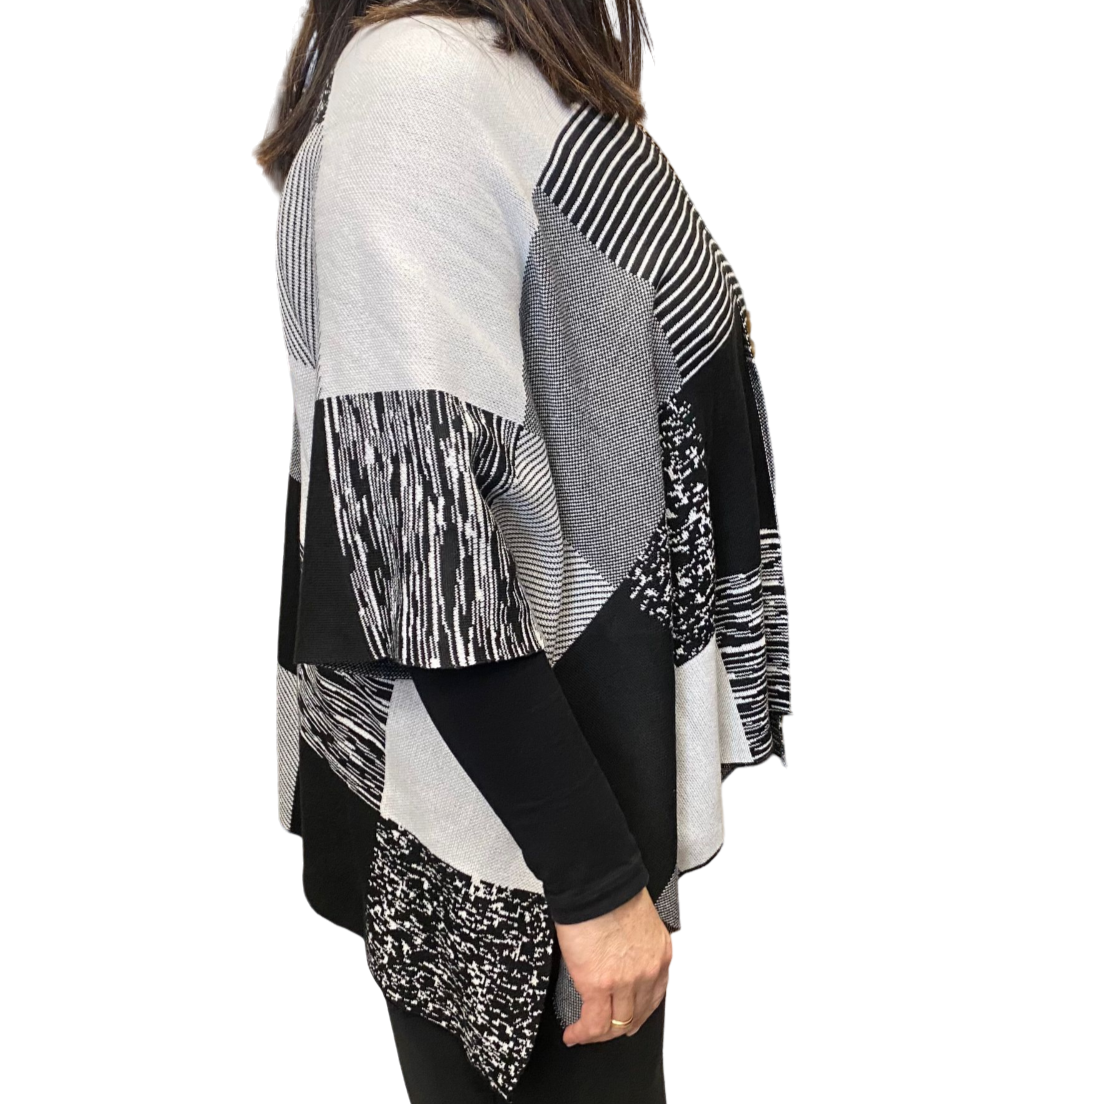 Censured shawl with sleeves for women WW2175 T TPW1 0190 white-black